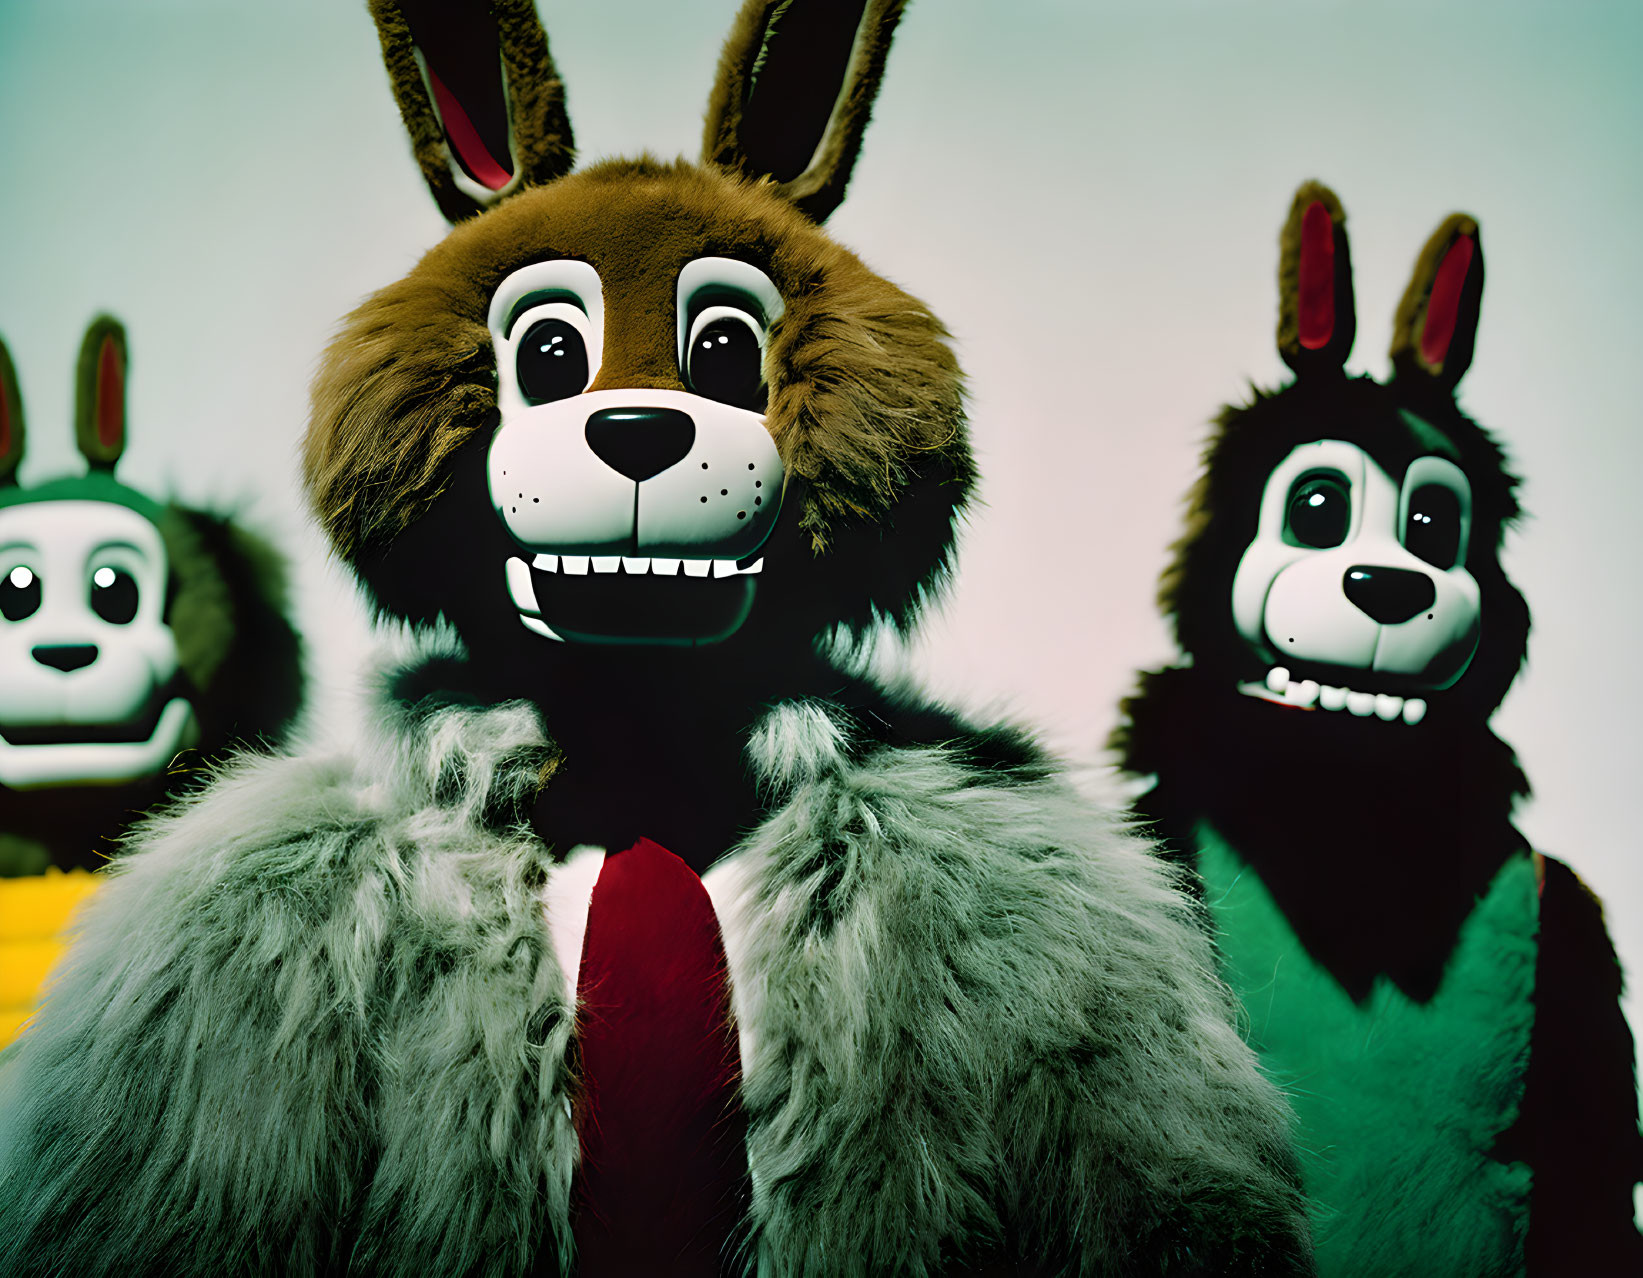 Three individuals in oversized dog costumes with rabbit ears and shirts and ties posing with exaggerated smiles.